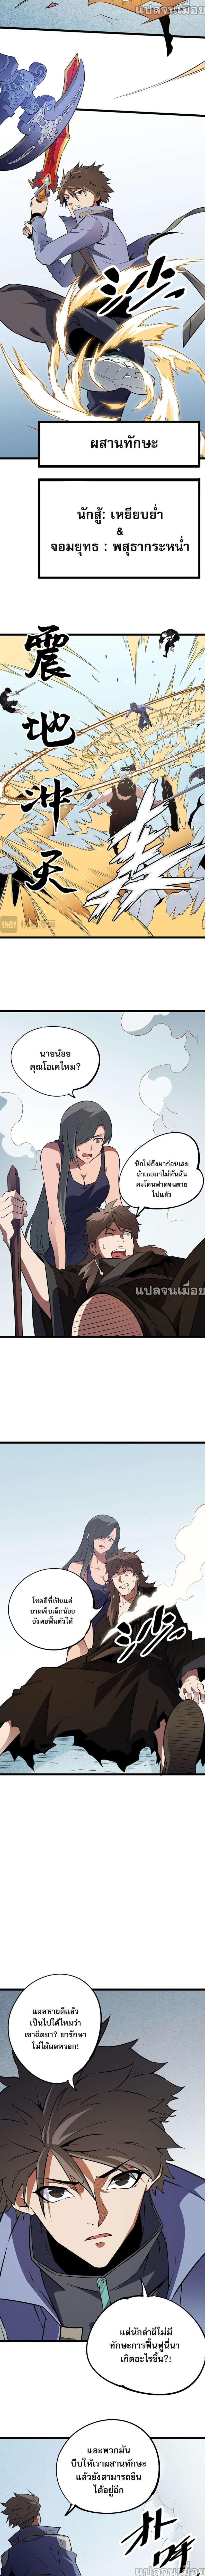 Job Changing for the Entire Population: The Jobless Me Will Terminate the Gods ฉันคือผู้เล่นไร้อาชีพที่สังหารเหล่าเทพ 67-67